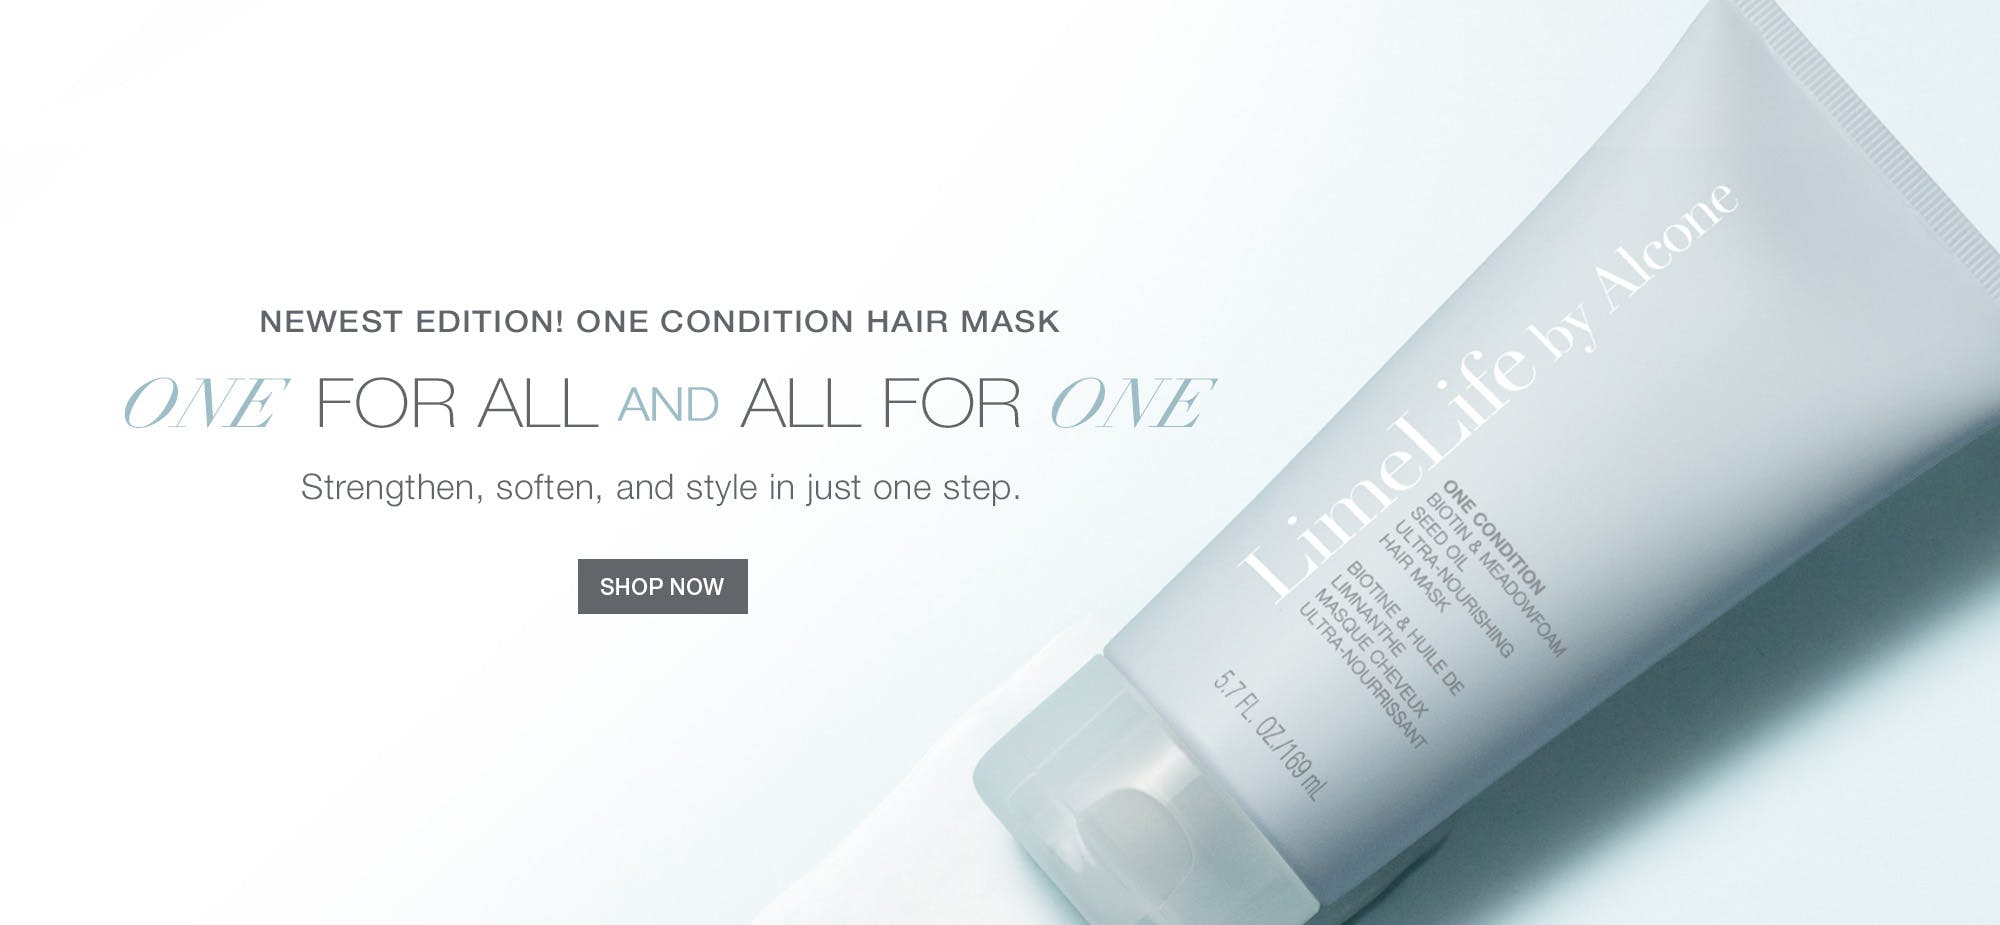 LimeLife's New One Condition Hair Mask